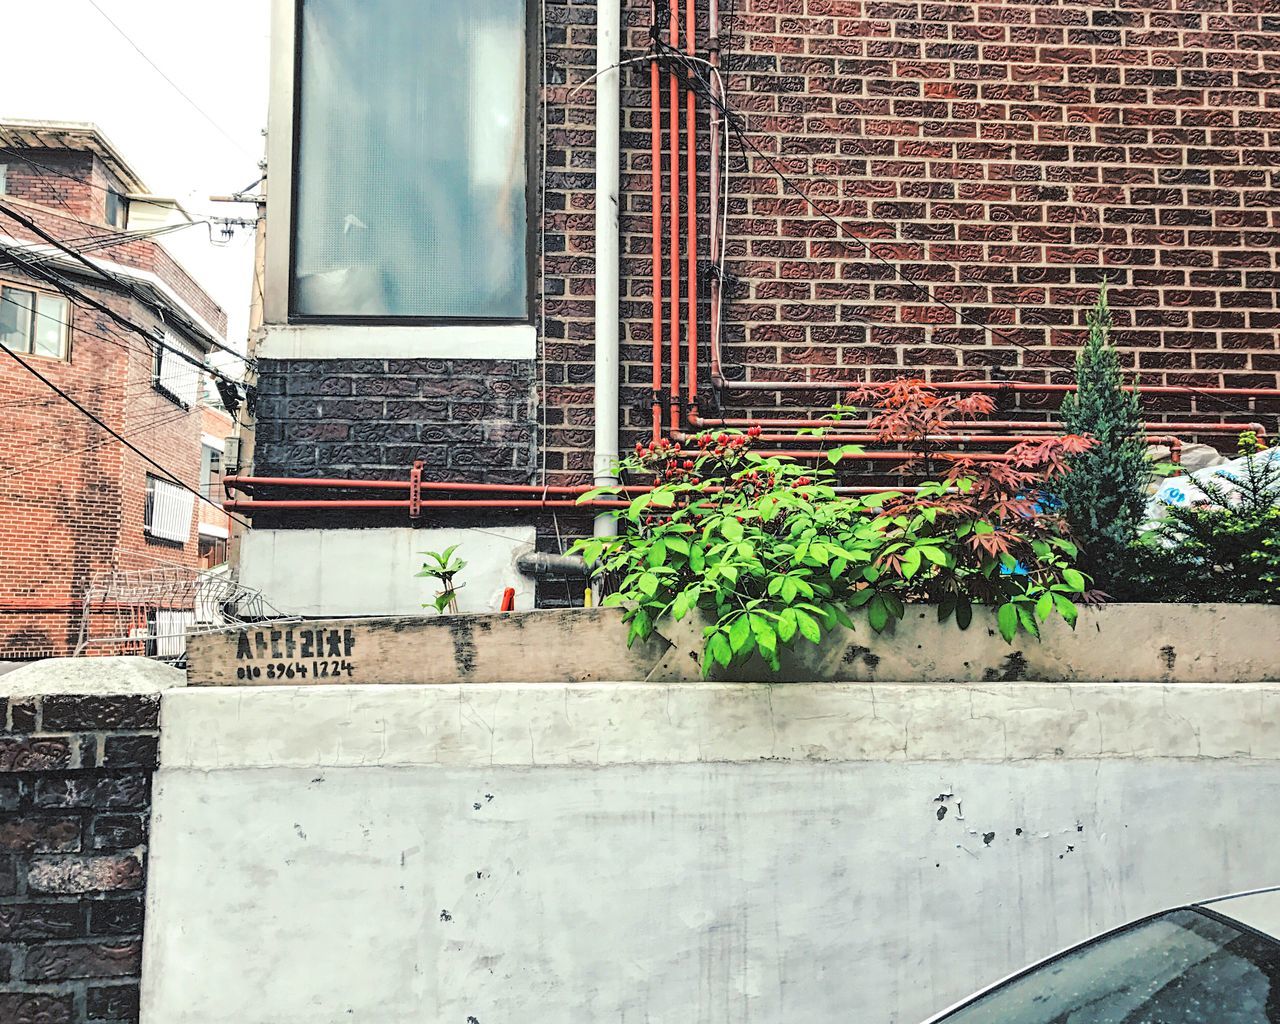 growth, plant, day, built structure, architecture, no people, brick wall, outdoors, nature, ivy